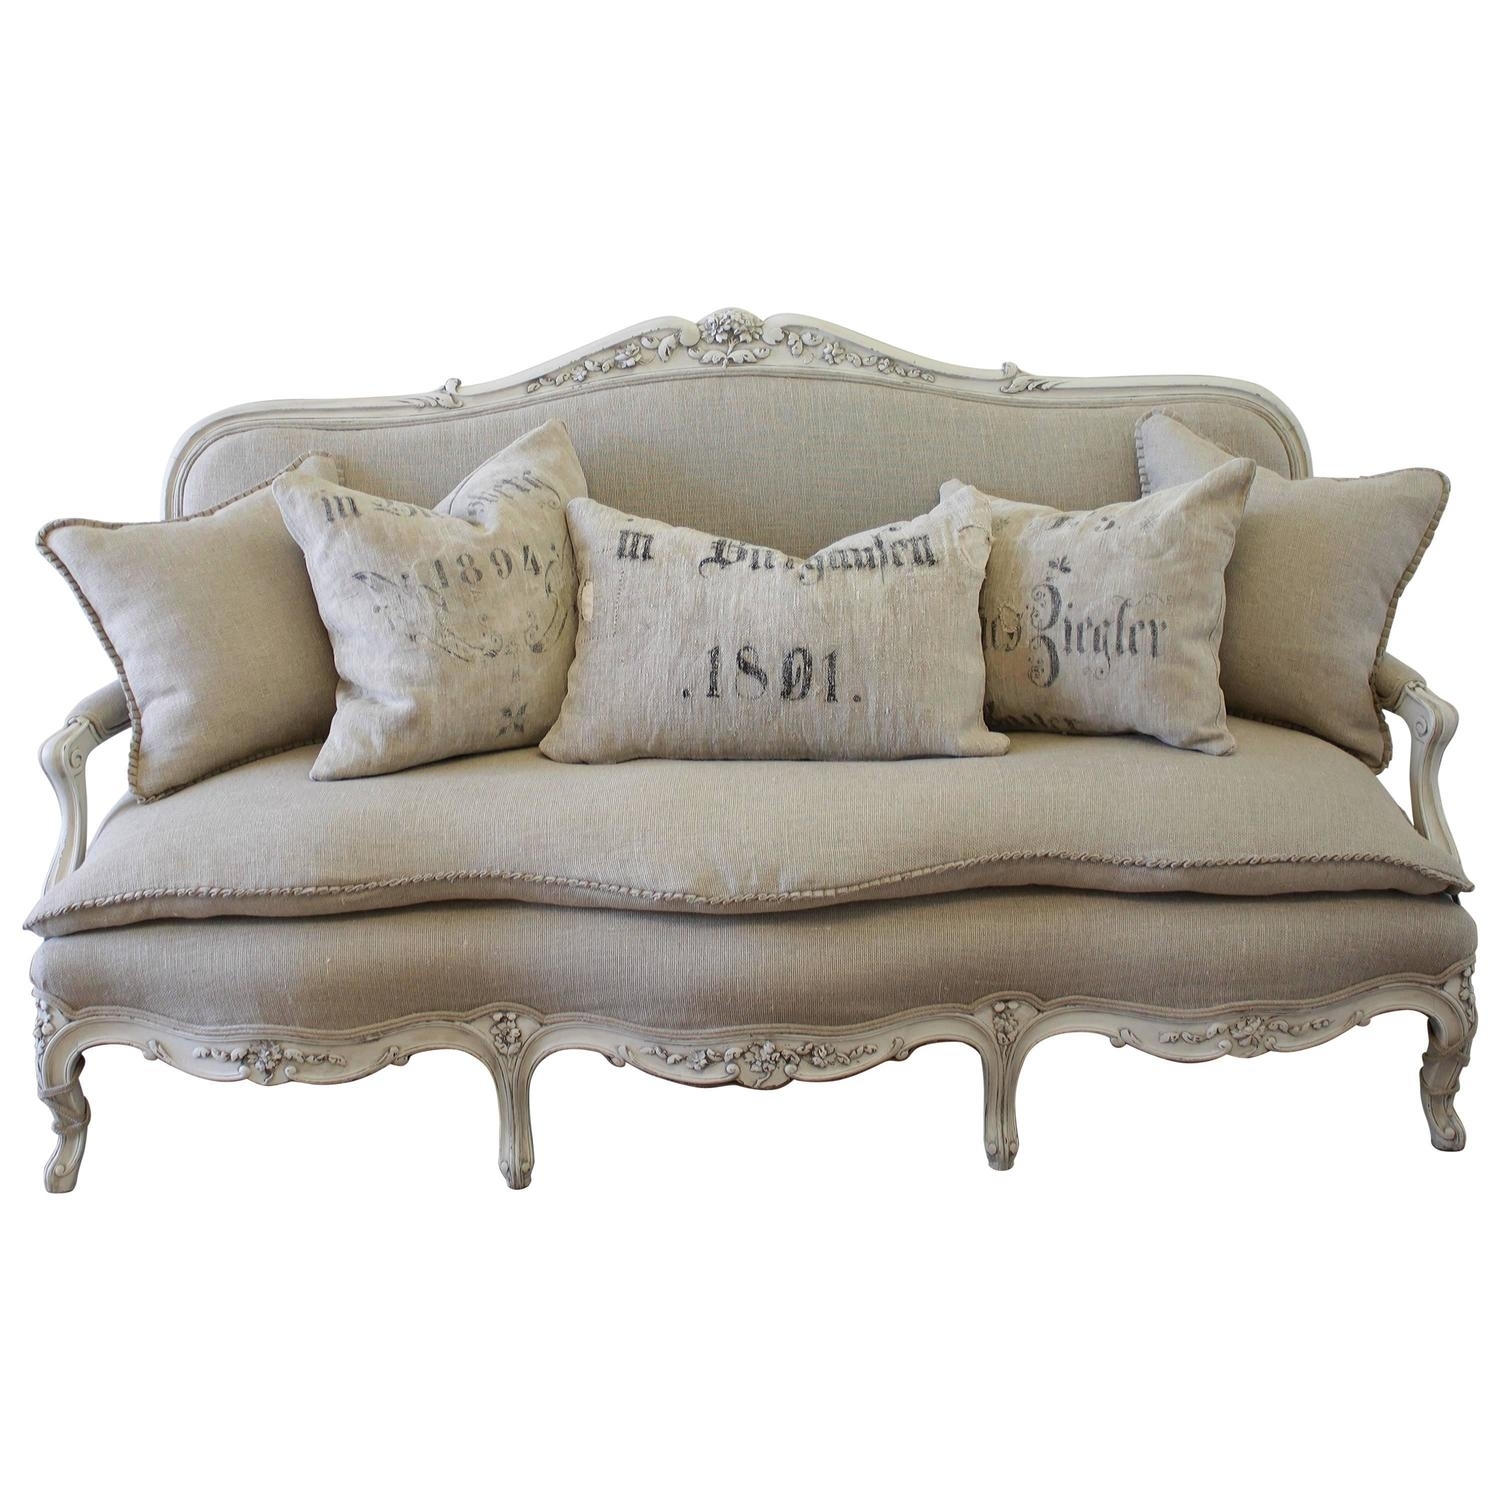 50+ French Country Sofa You'll Love in 2020 - Visual Hunt